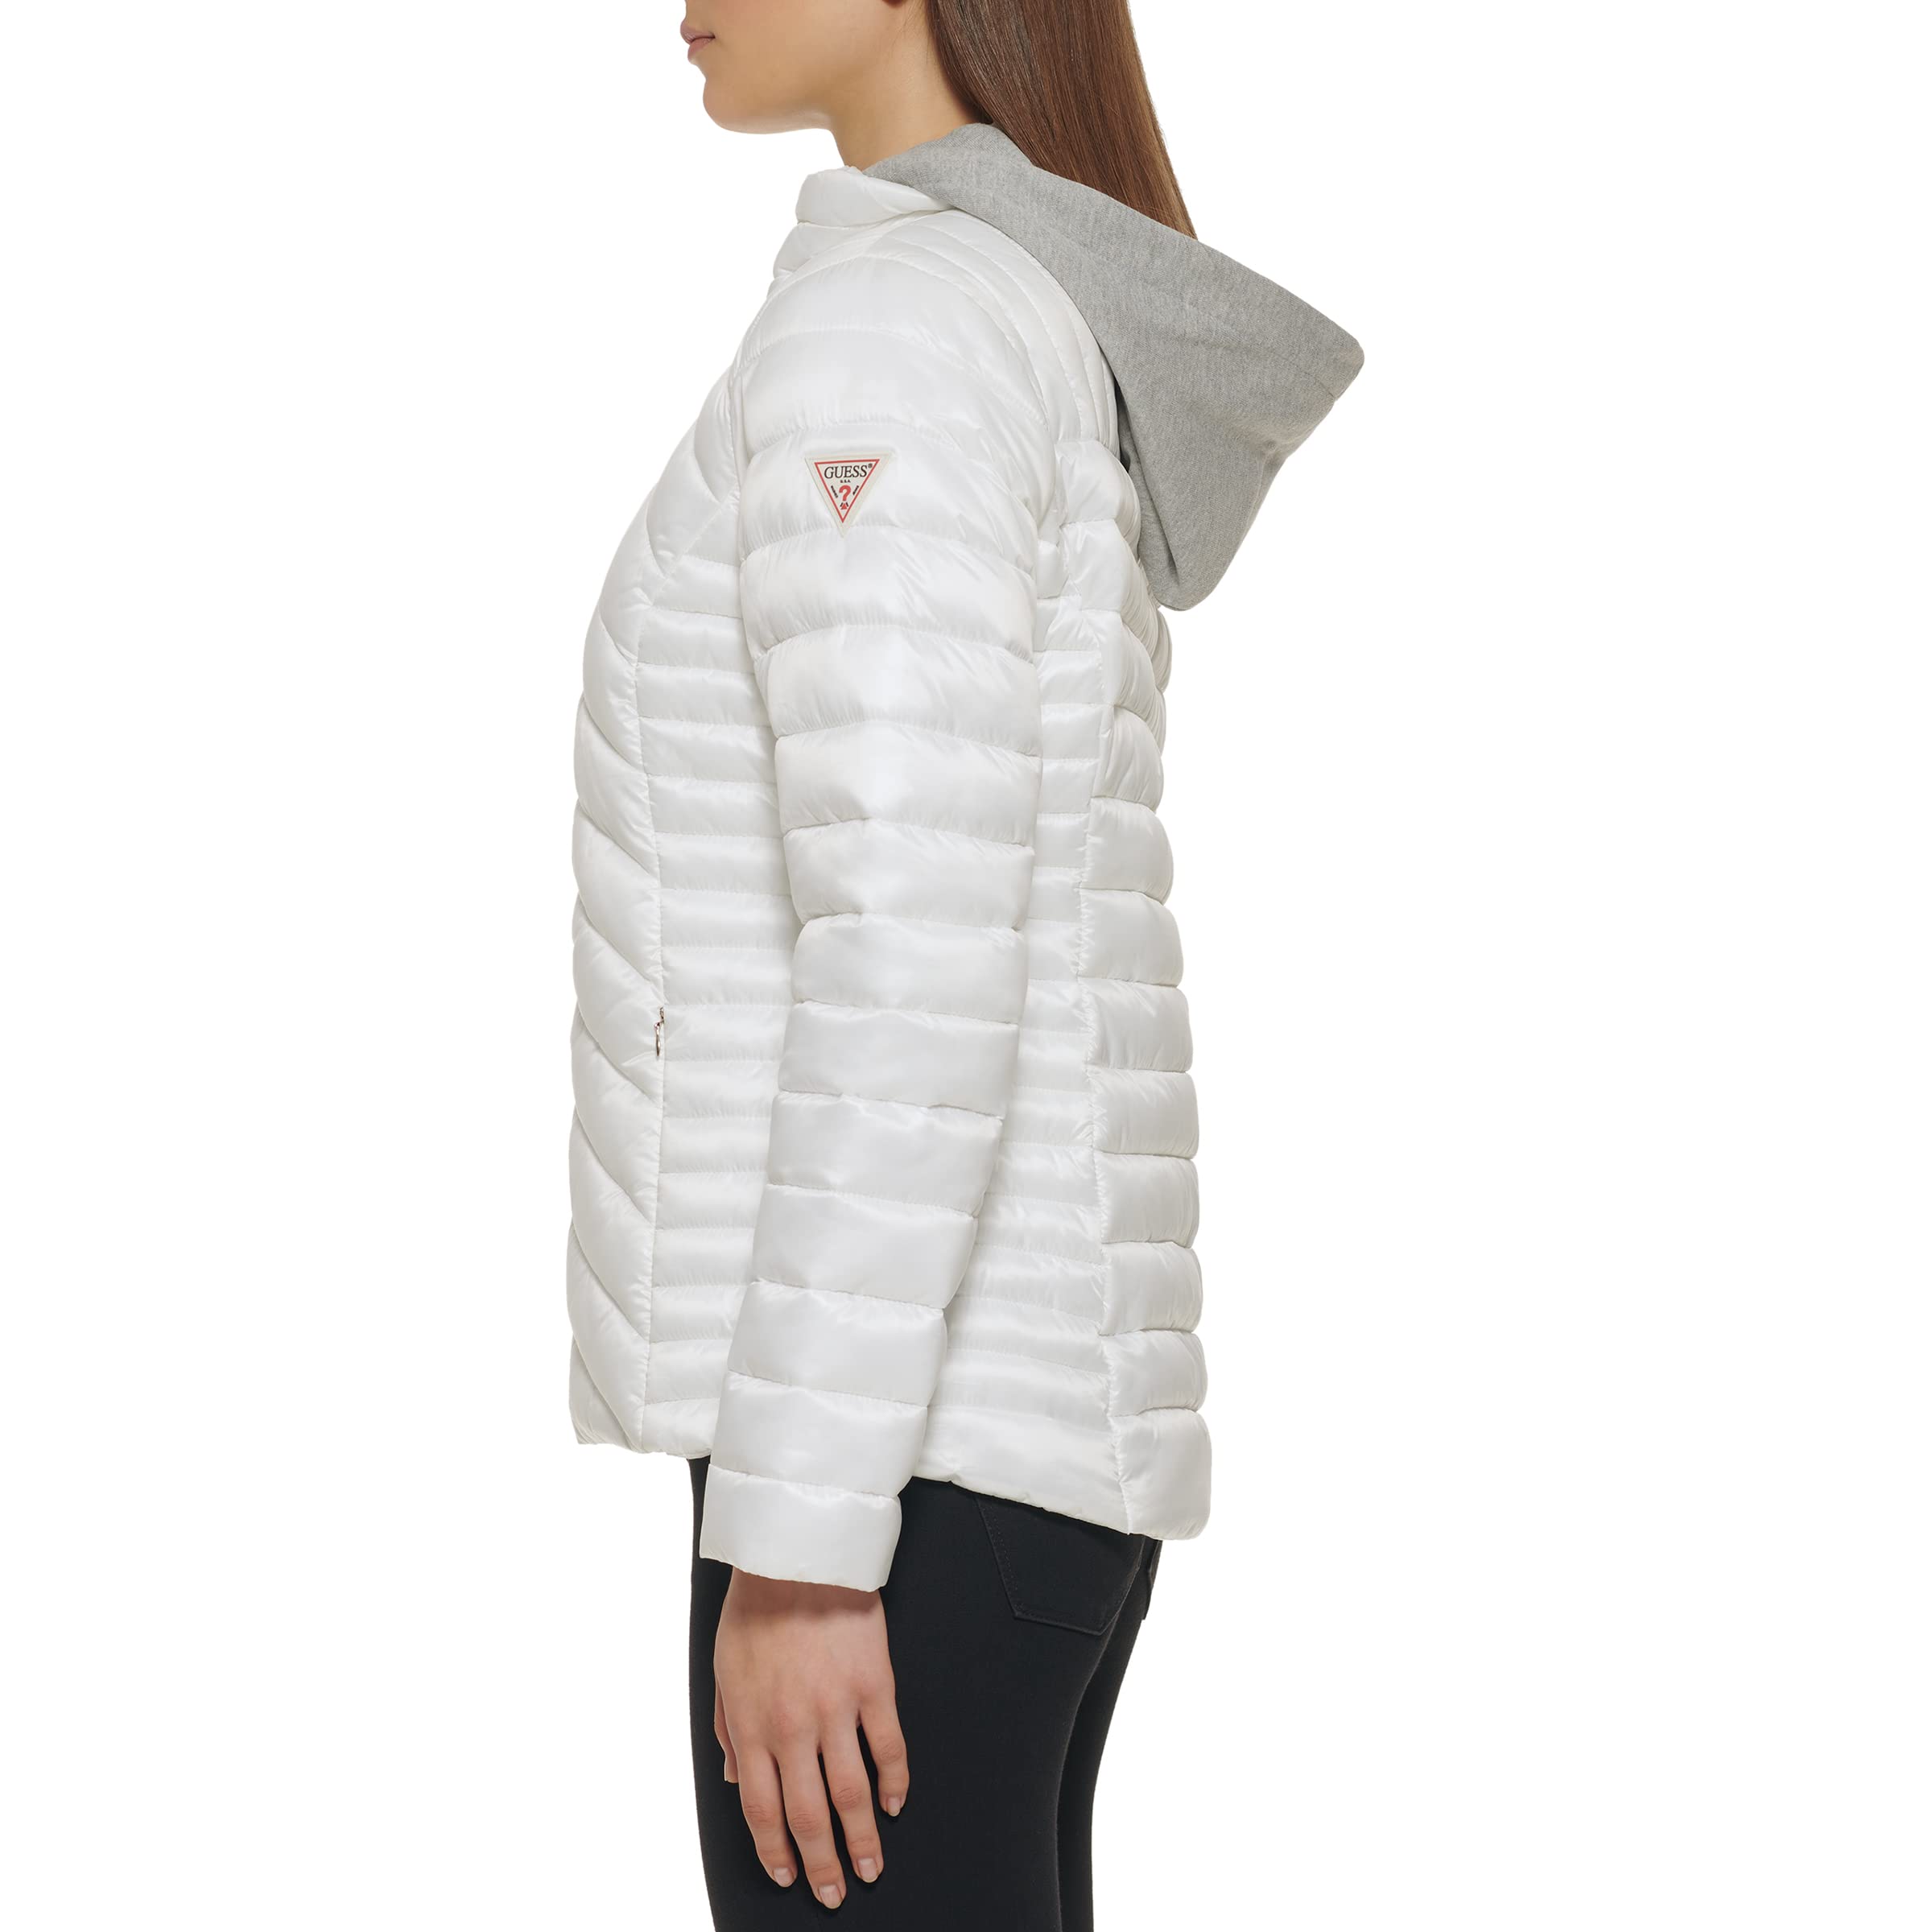 GUESS Women's Light Packable Jacket – Quilted, Transitional Puffer